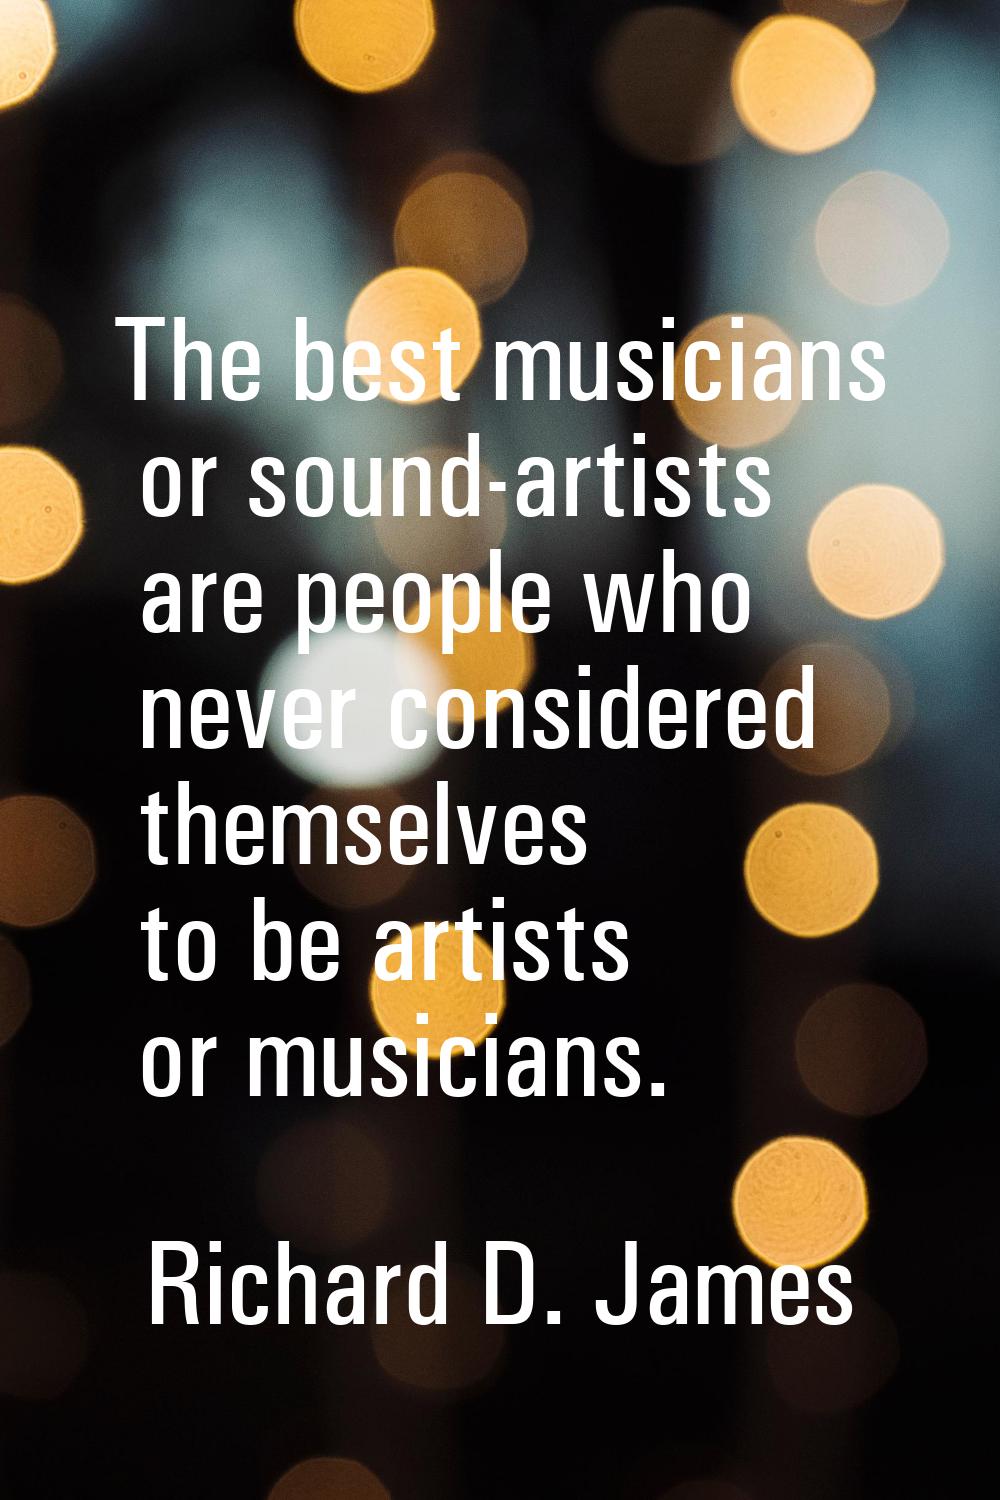 The best musicians or sound-artists are people who never considered themselves to be artists or mus